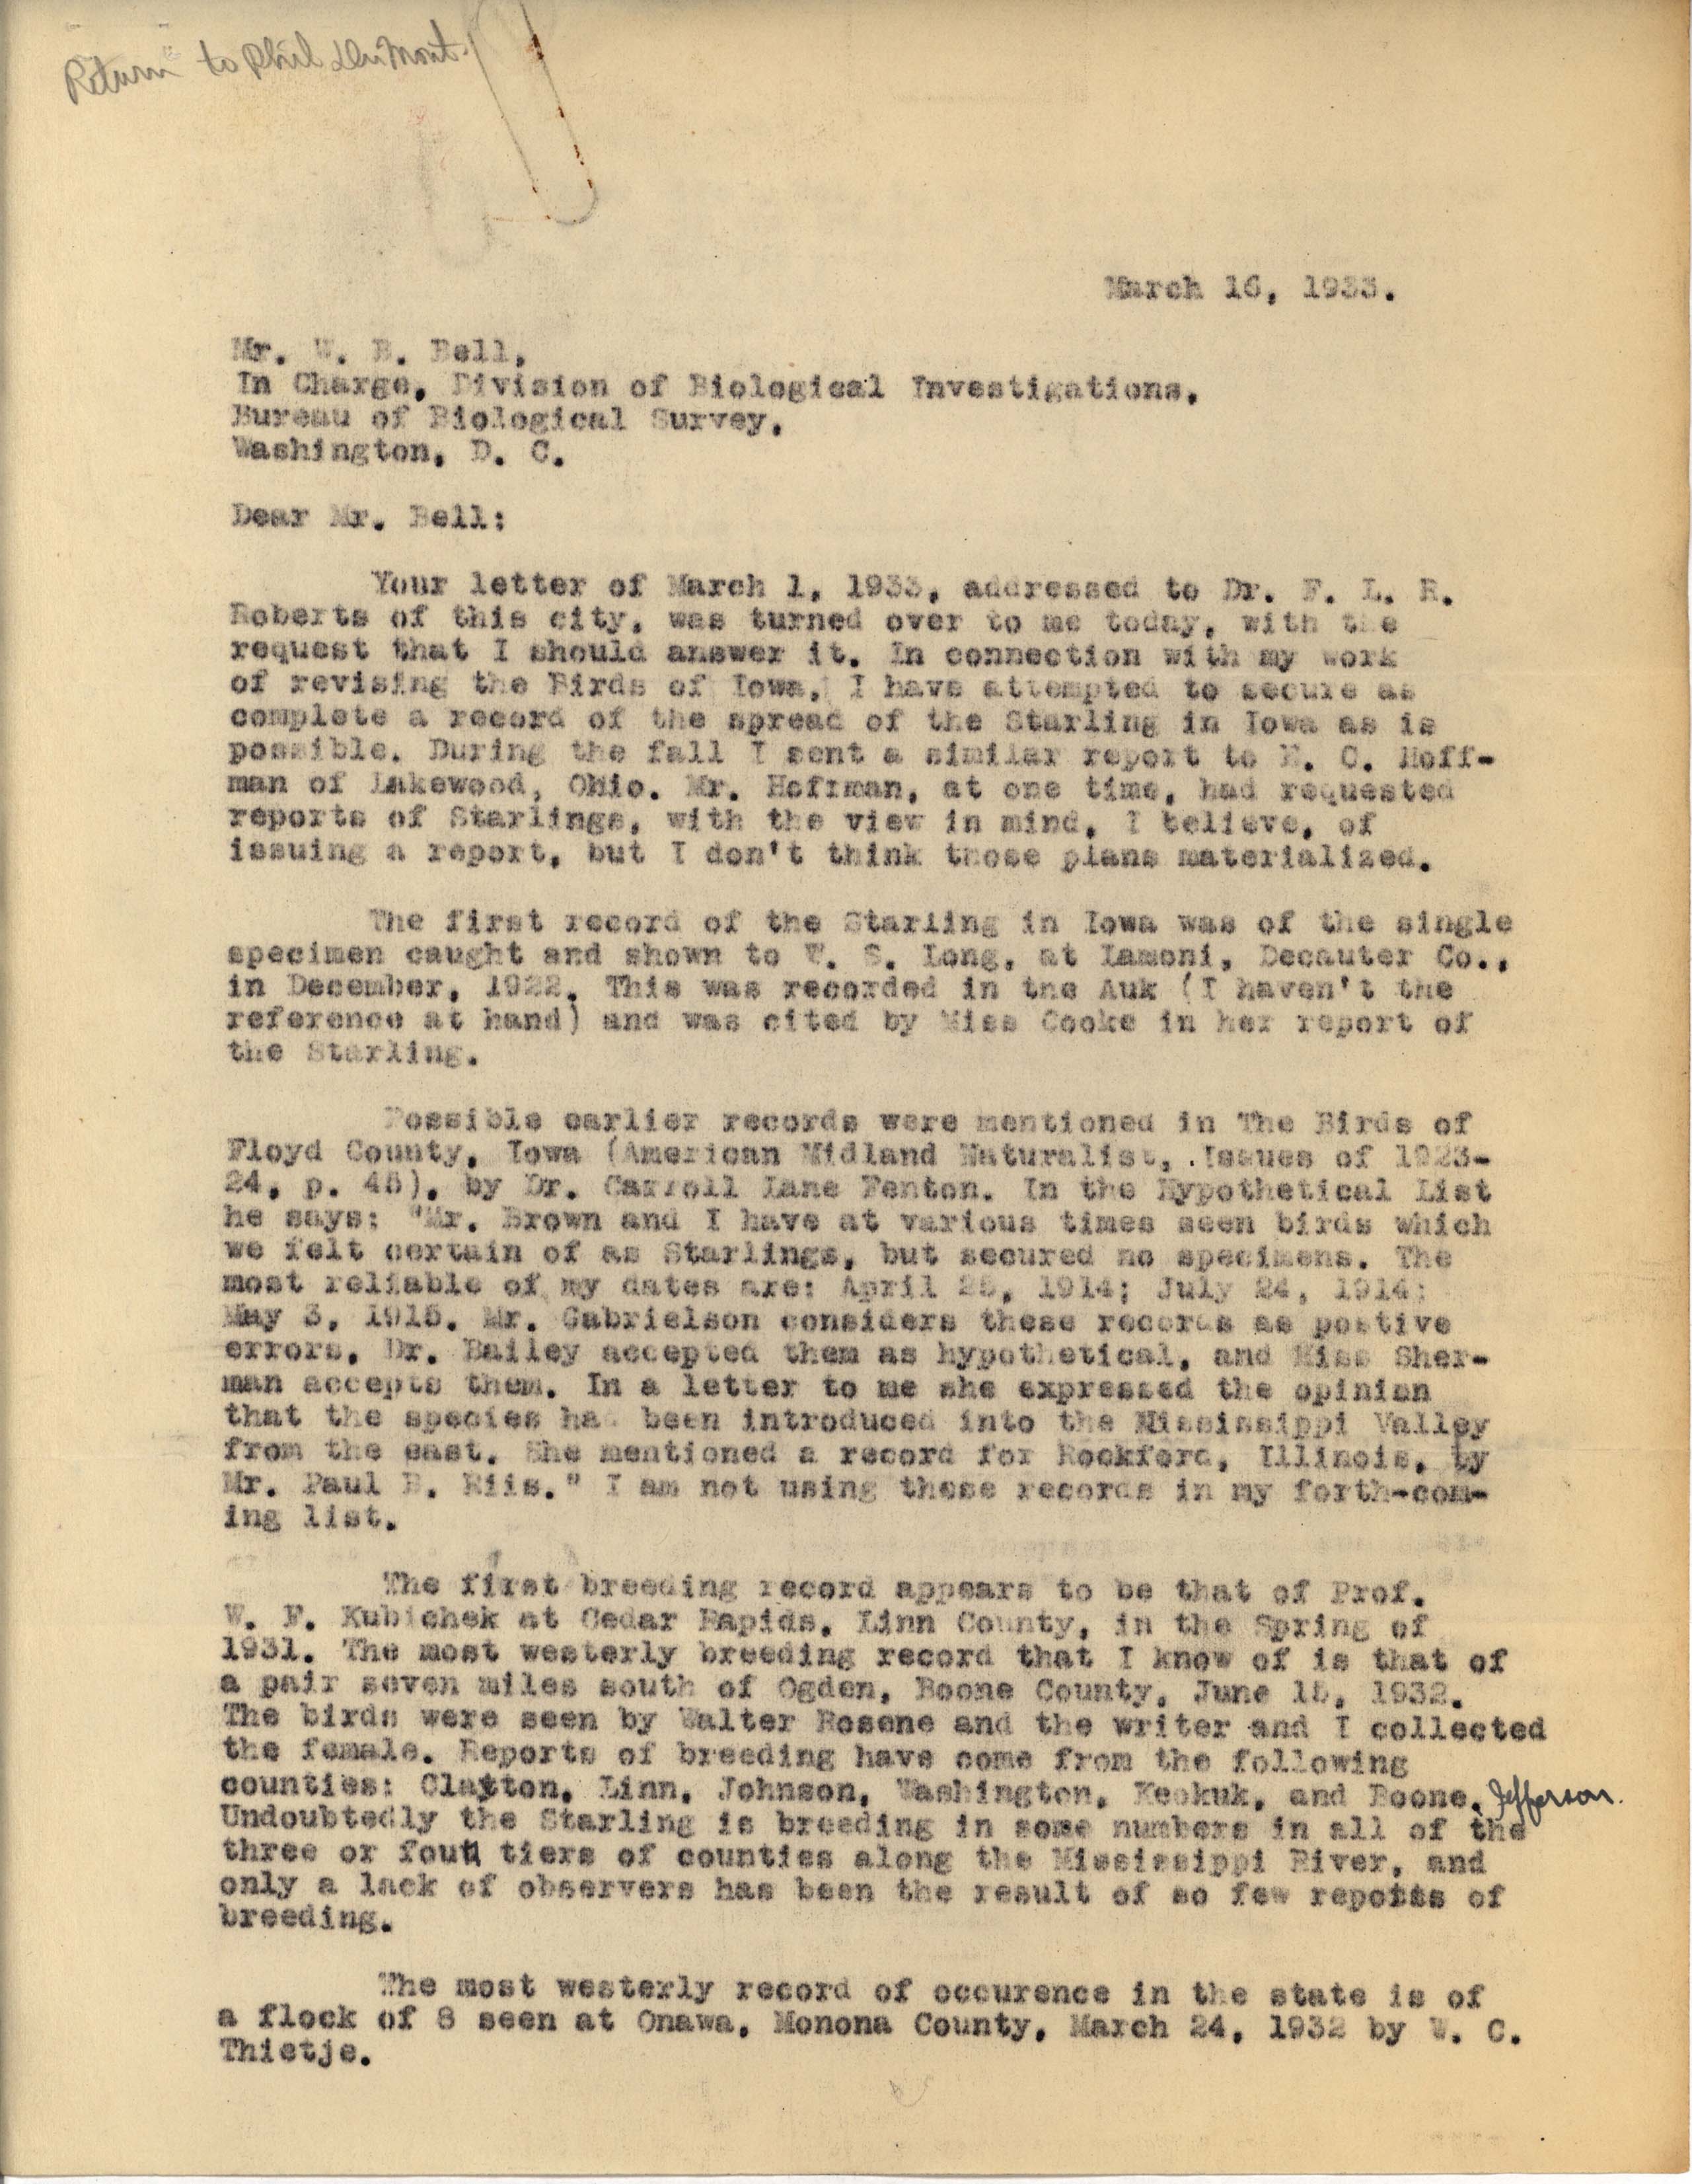 Philip DuMont letter to William Bell regarding Starlings in Iowa, March 16, 1933